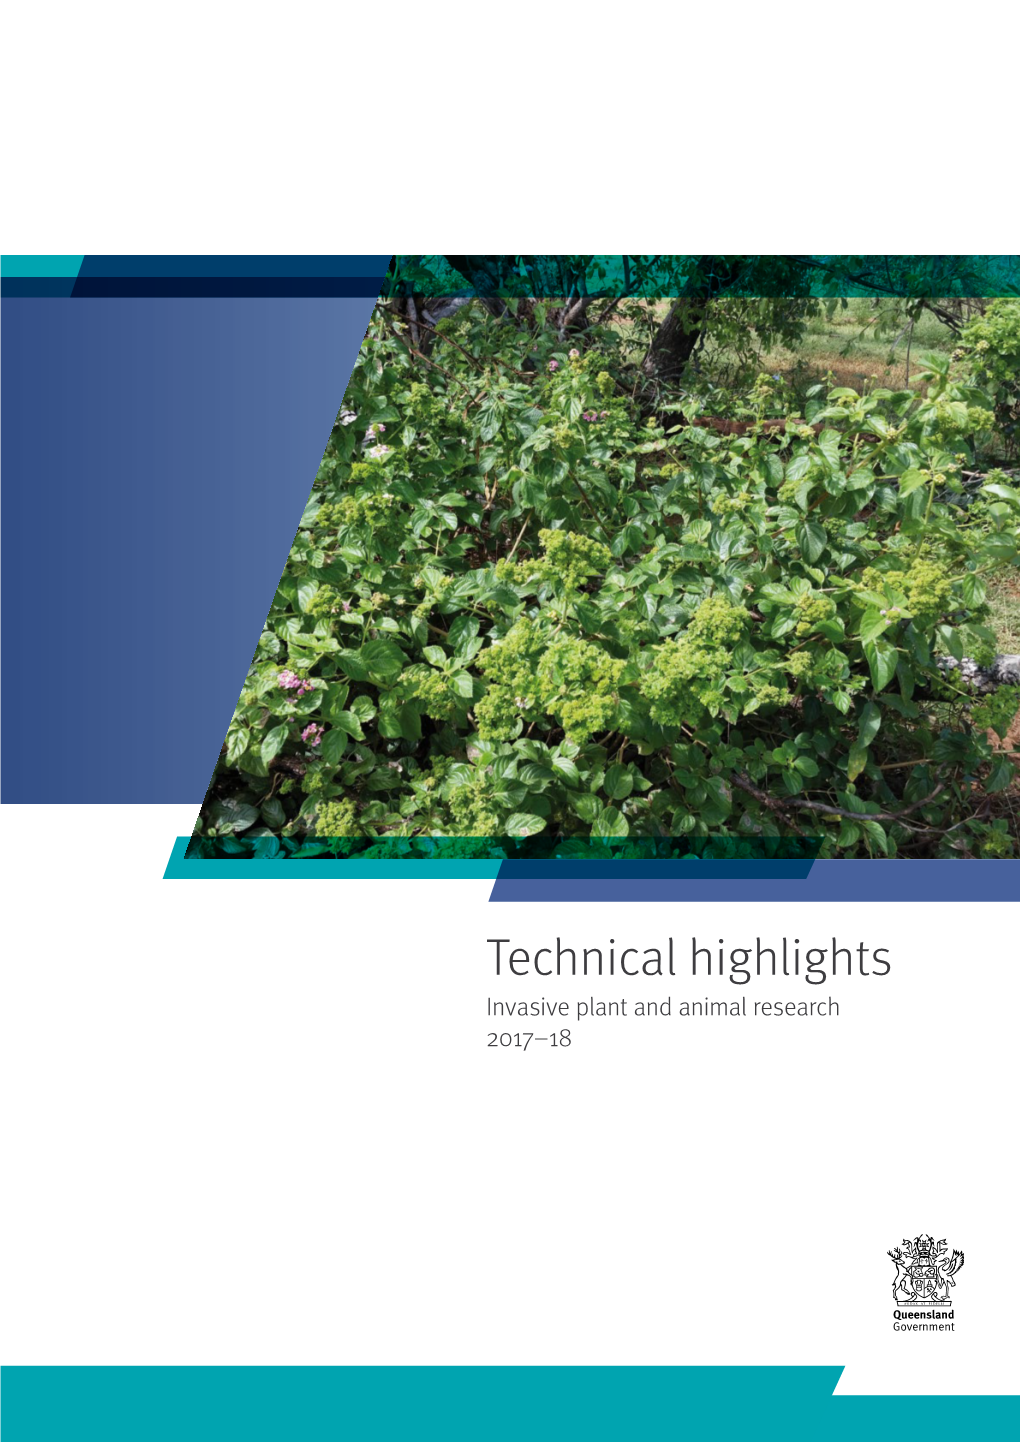 Technical Highlights Invasive Plant and Animal Research 2017-18